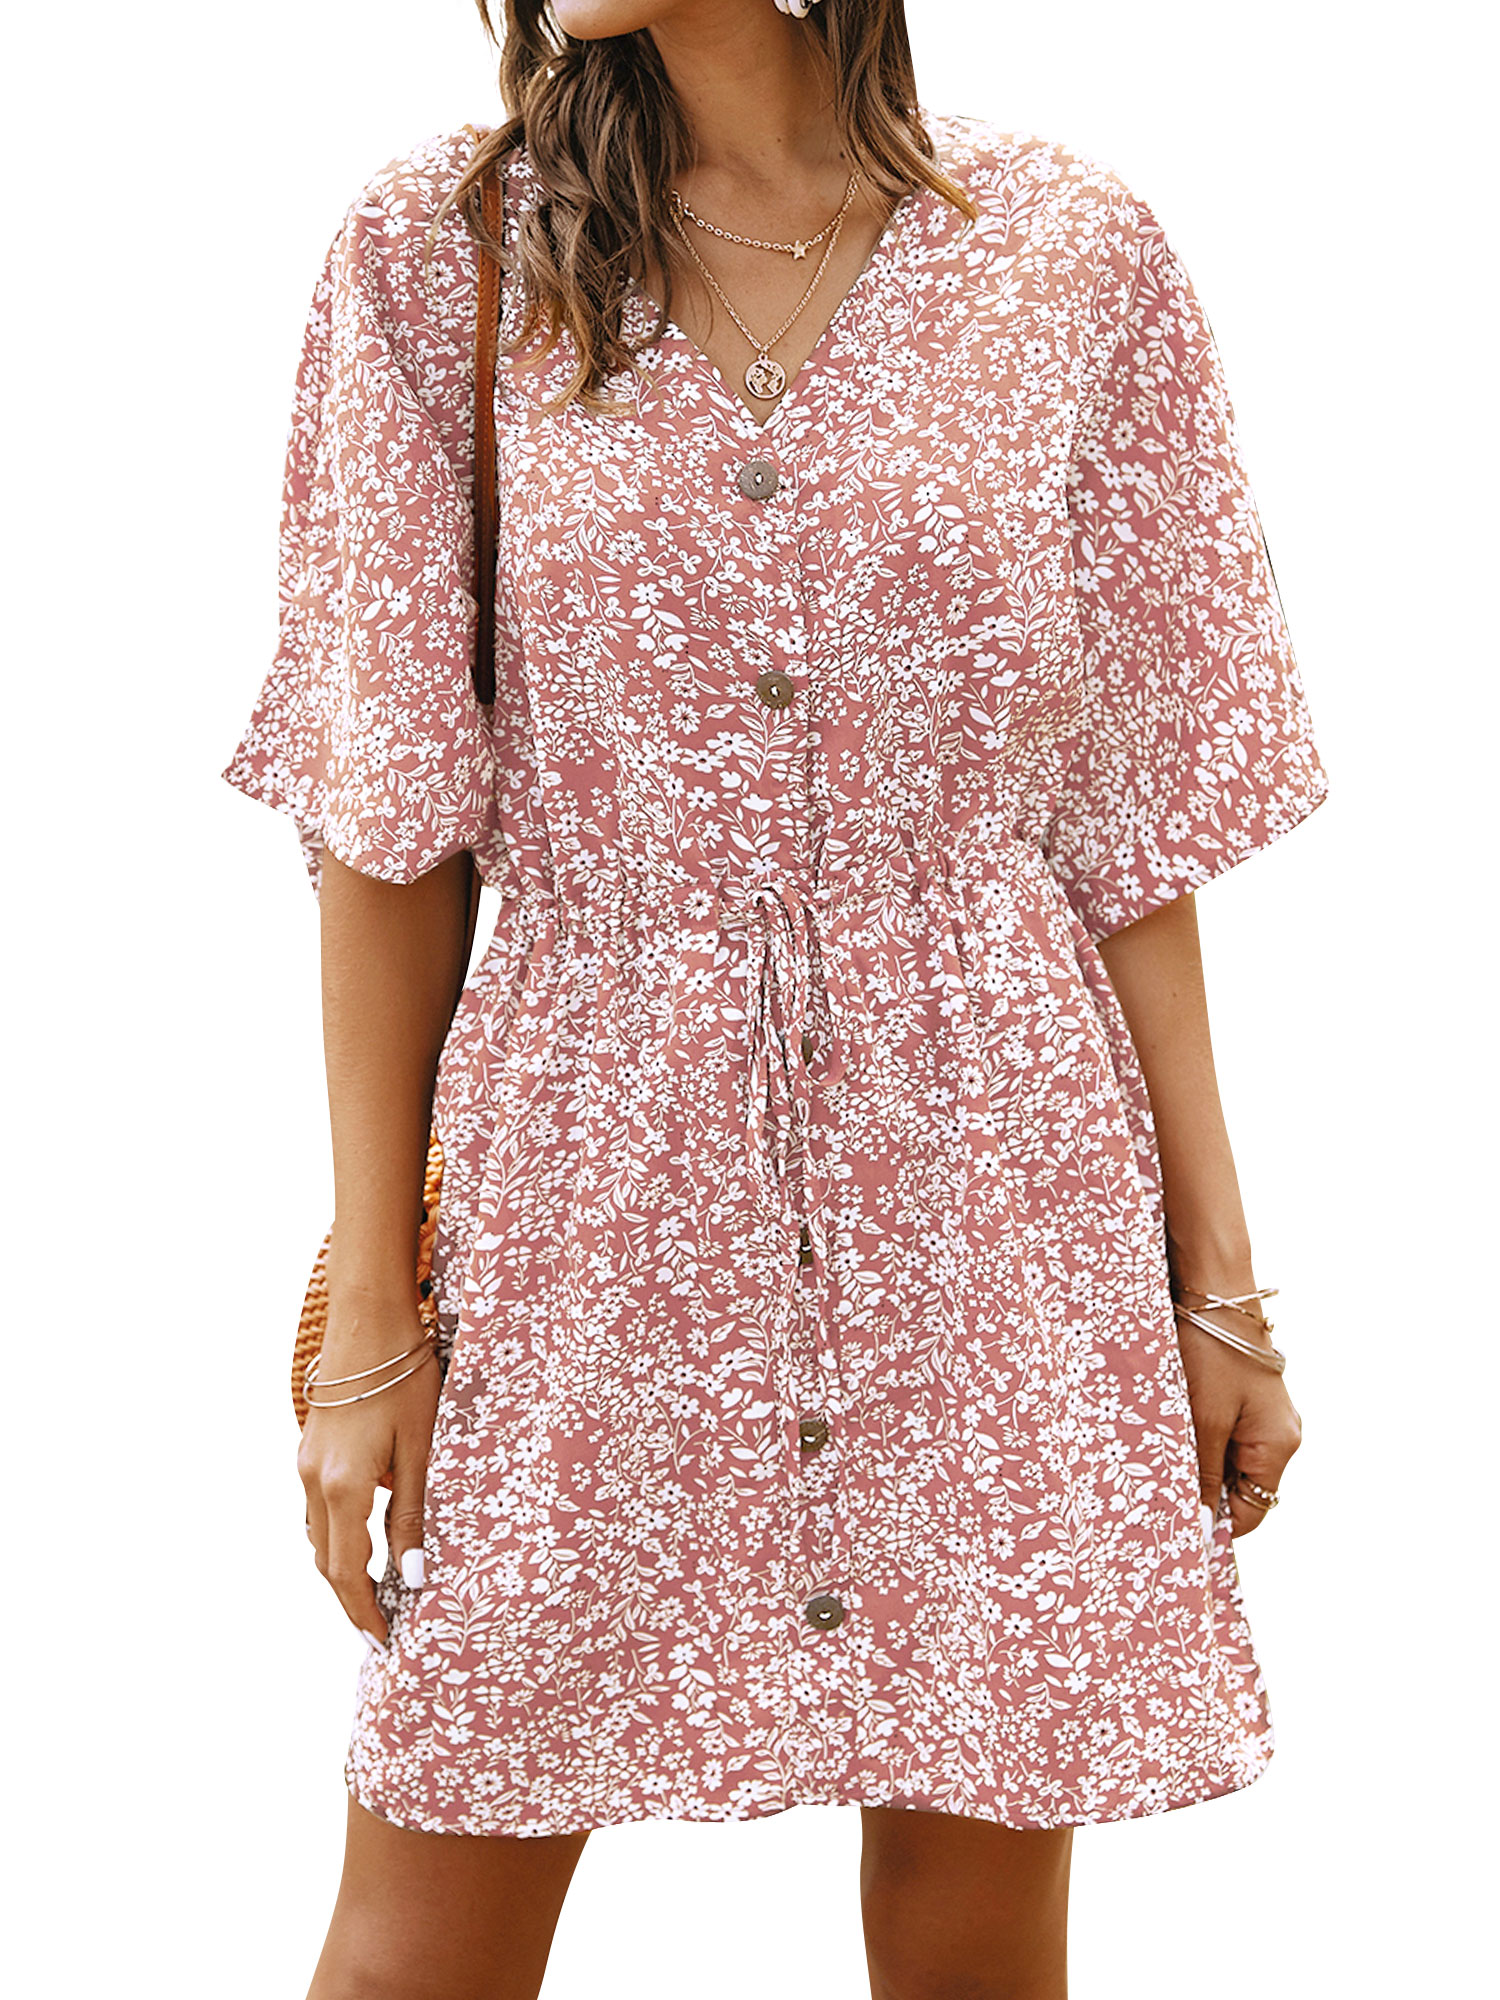 ZXZY Women Floral Printed Buttons Tie Waist Short Sleeves Mini Dress - image 1 of 12